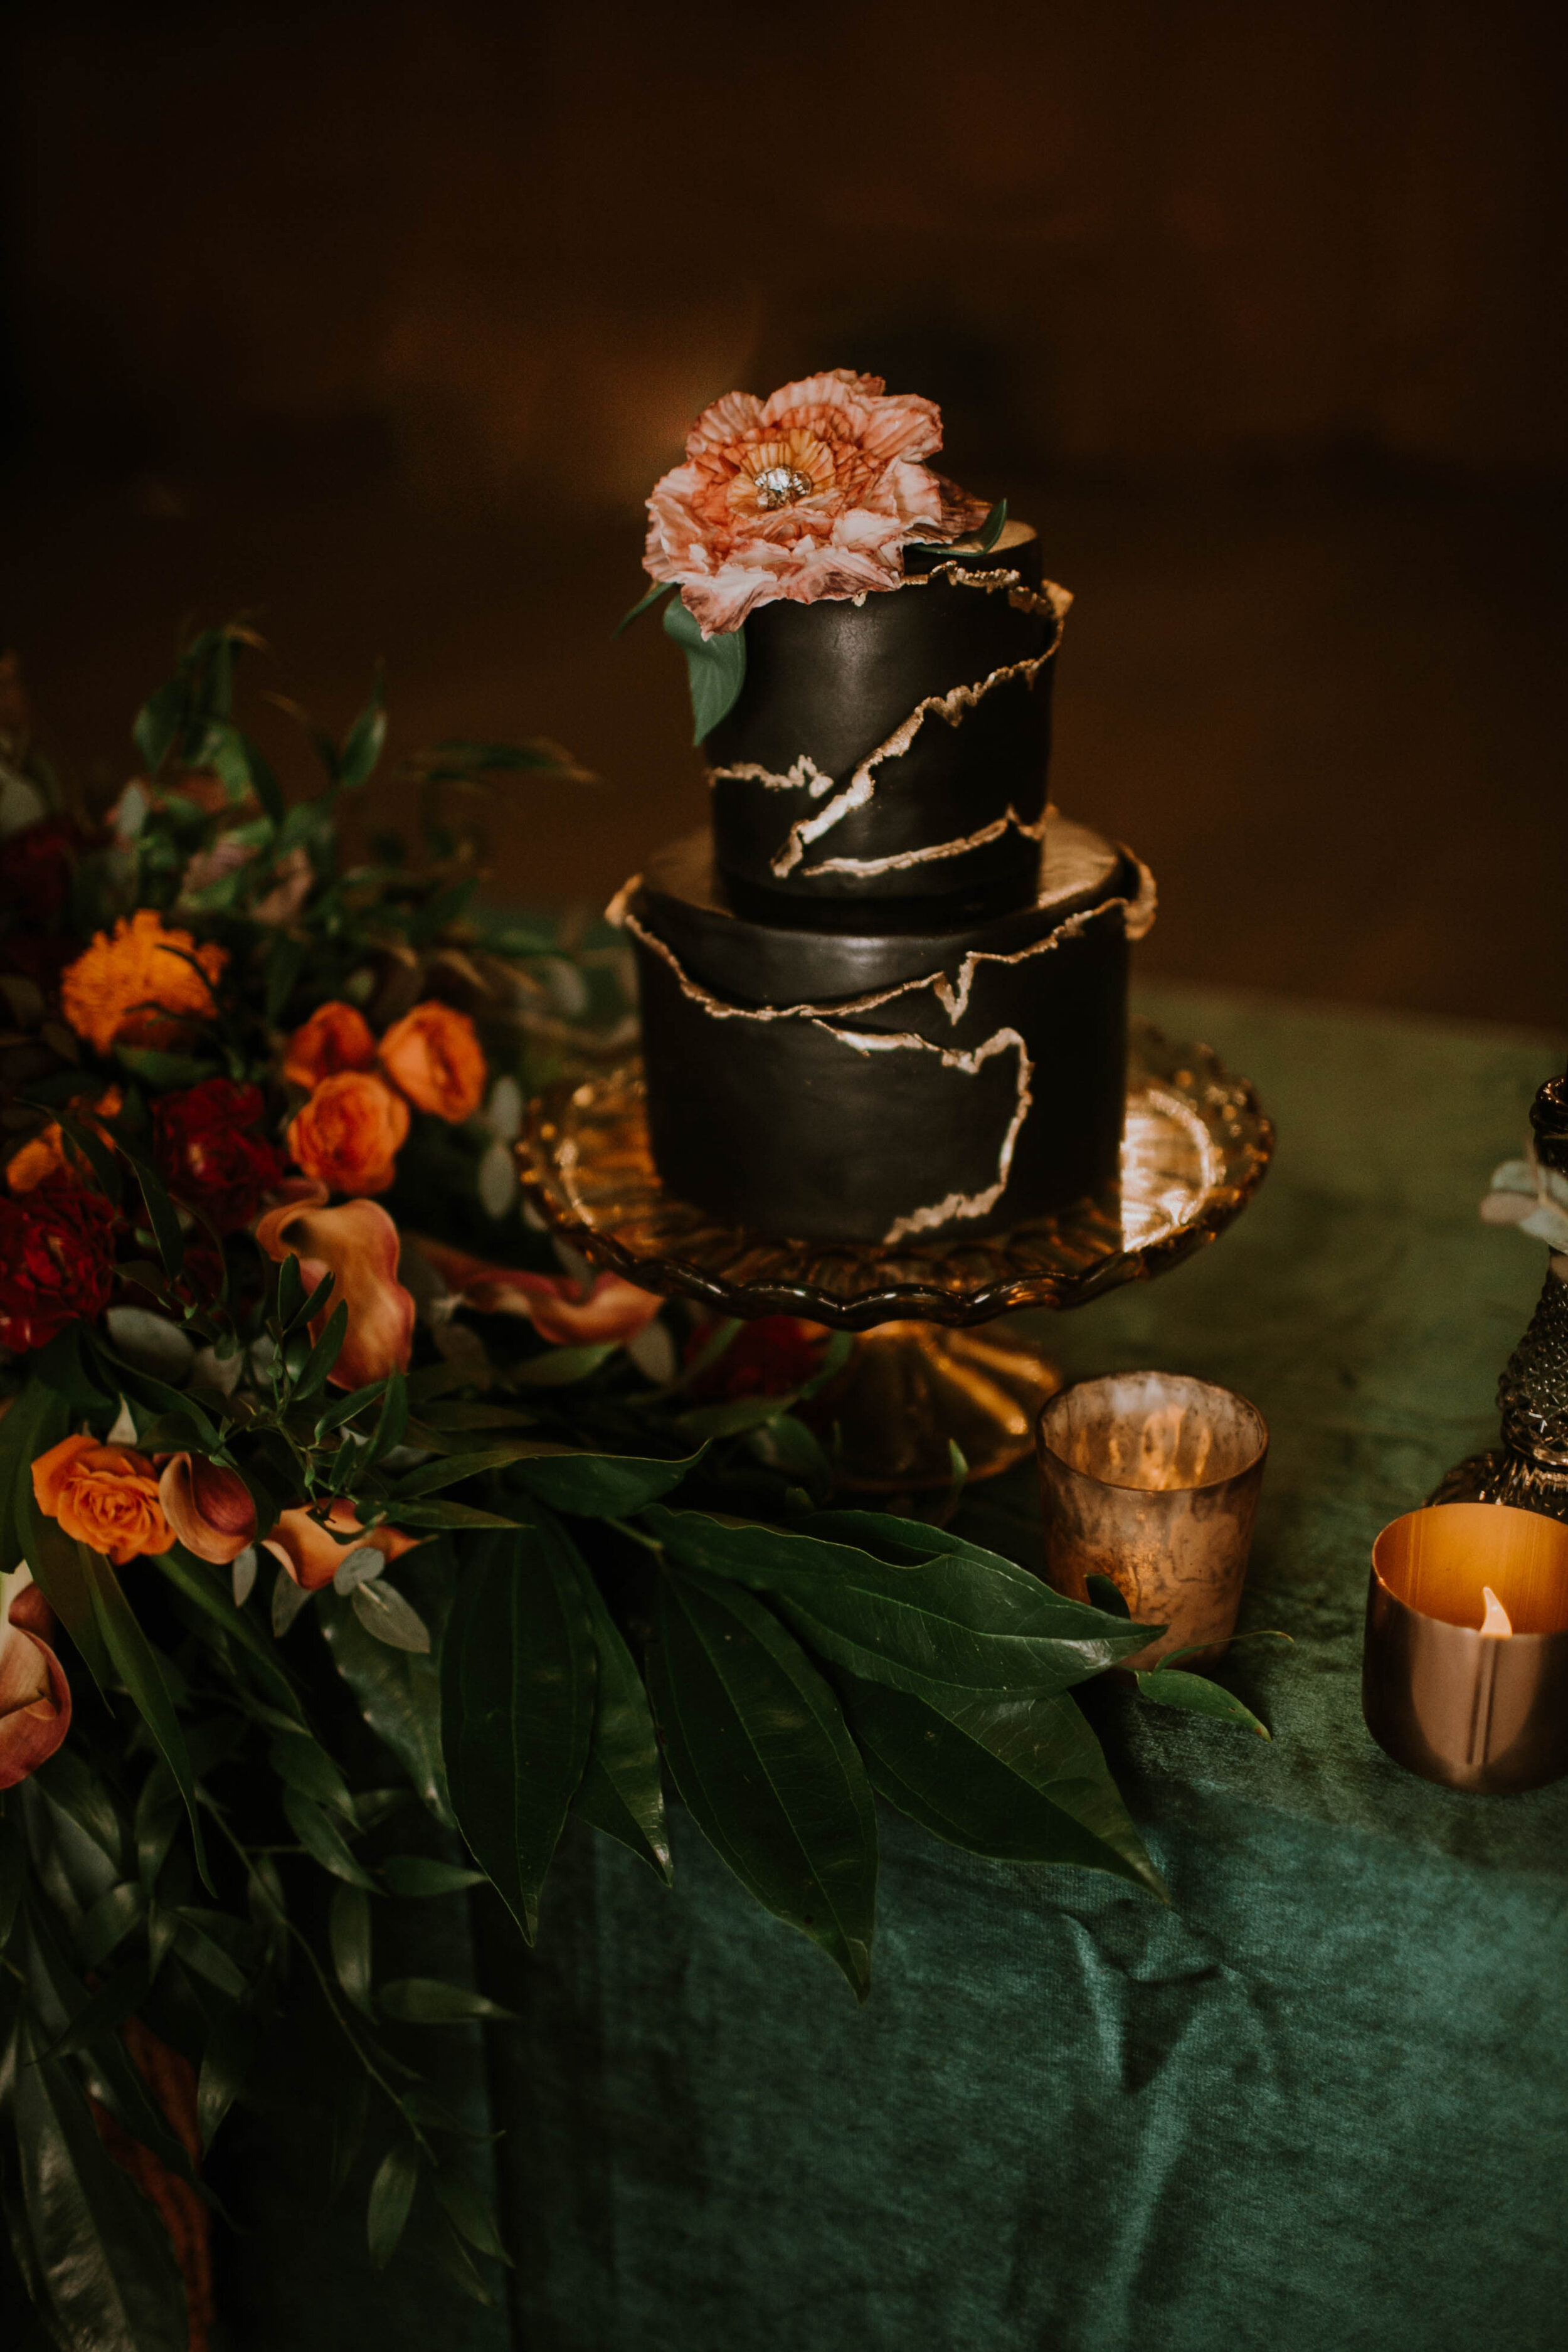 Modern black and gold wedding cake: Moody Fall Wedding Styled Shoot captured by Gabrielle Daylor Photography. See more fall wedding ideas at CHItheeWED.com!